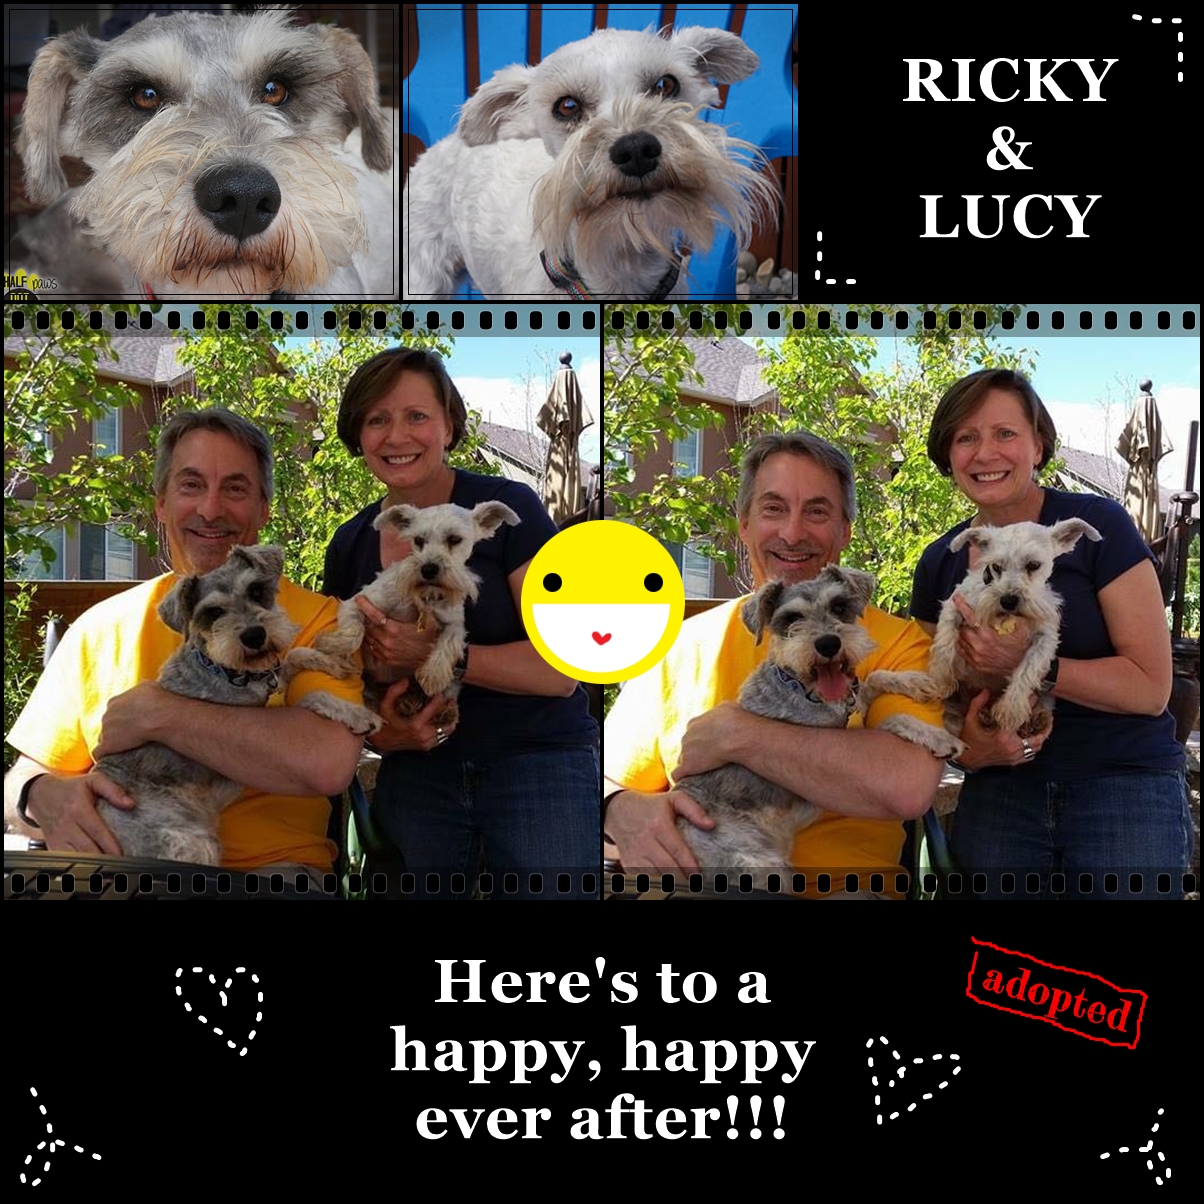 Ricky & Lucy (Schnauzers adopted)